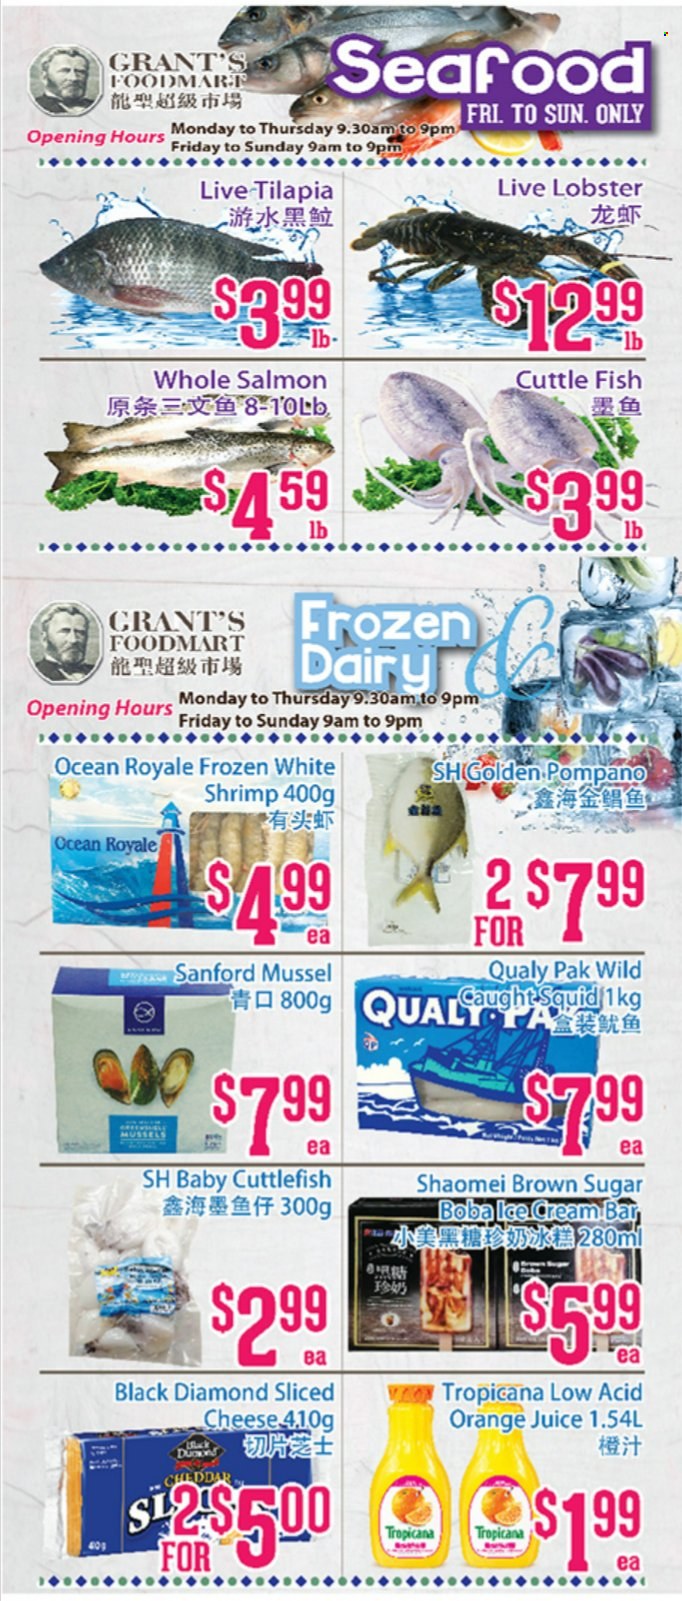 thumbnail - Grant's Foodmart Flyer - October 15, 2021 - October 21, 2021 - Sales products - cuttlefish, lobster, mussels, salmon, squid, tilapia, pompano, fish, shrimps, sliced cheese, cheddar, cheese, cane sugar, orange juice, juice, Grant's. Page 2.